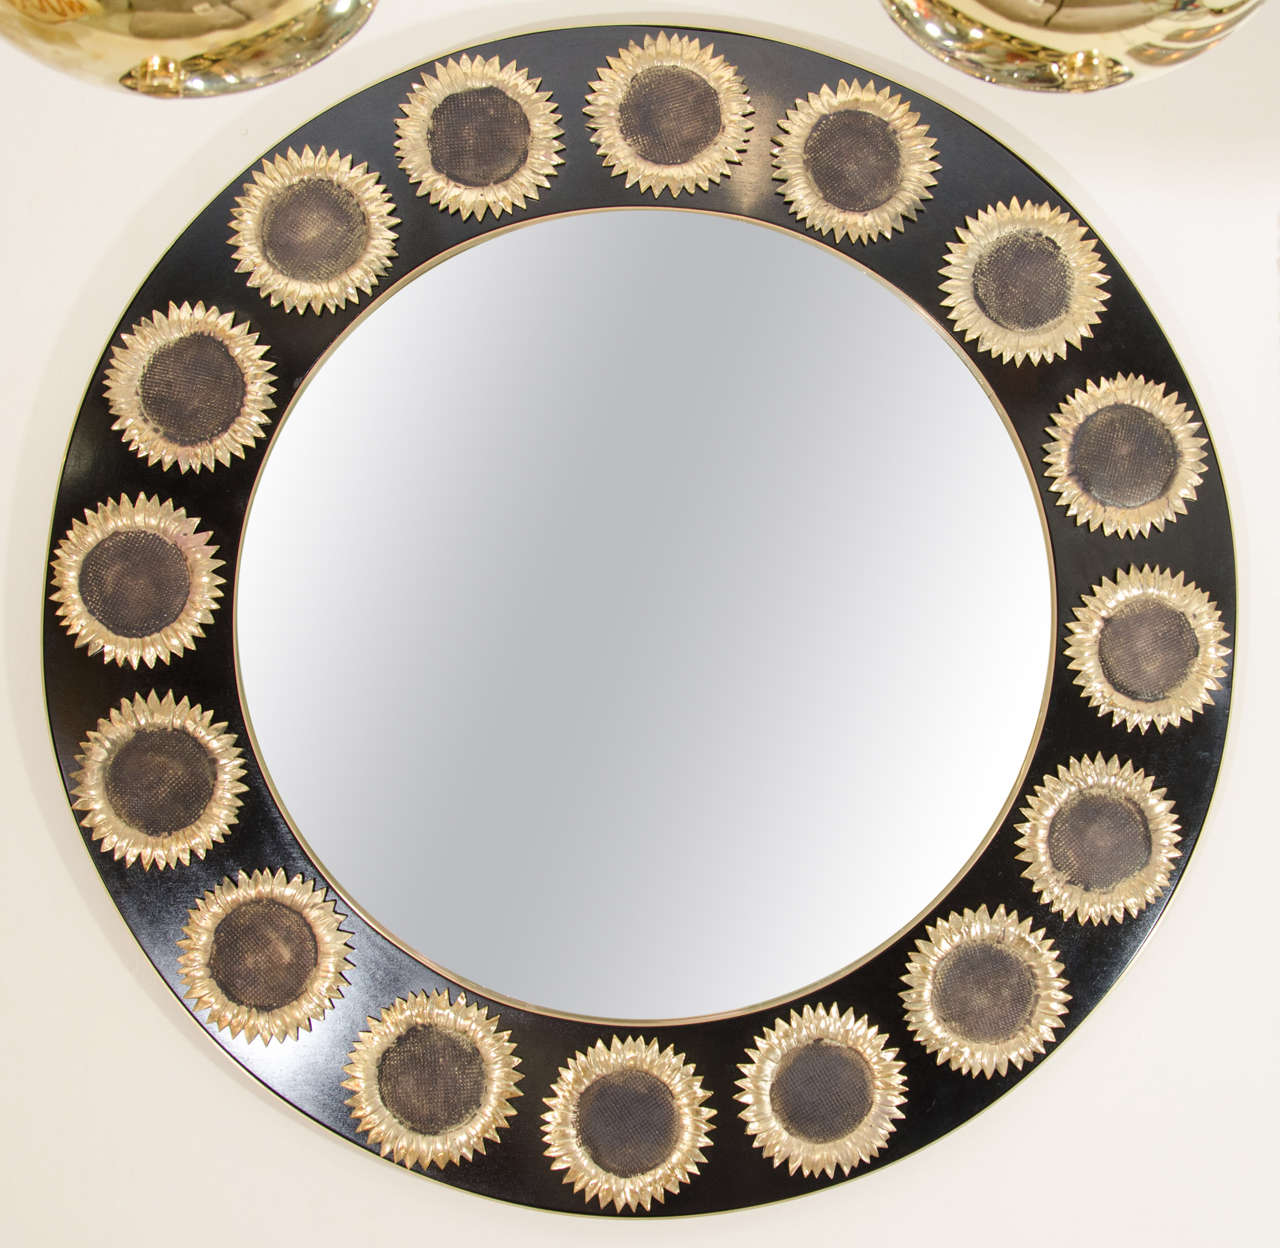 Circular mirror with lacquered and ebonized wood surround featuring brass and enameled sunflower details.